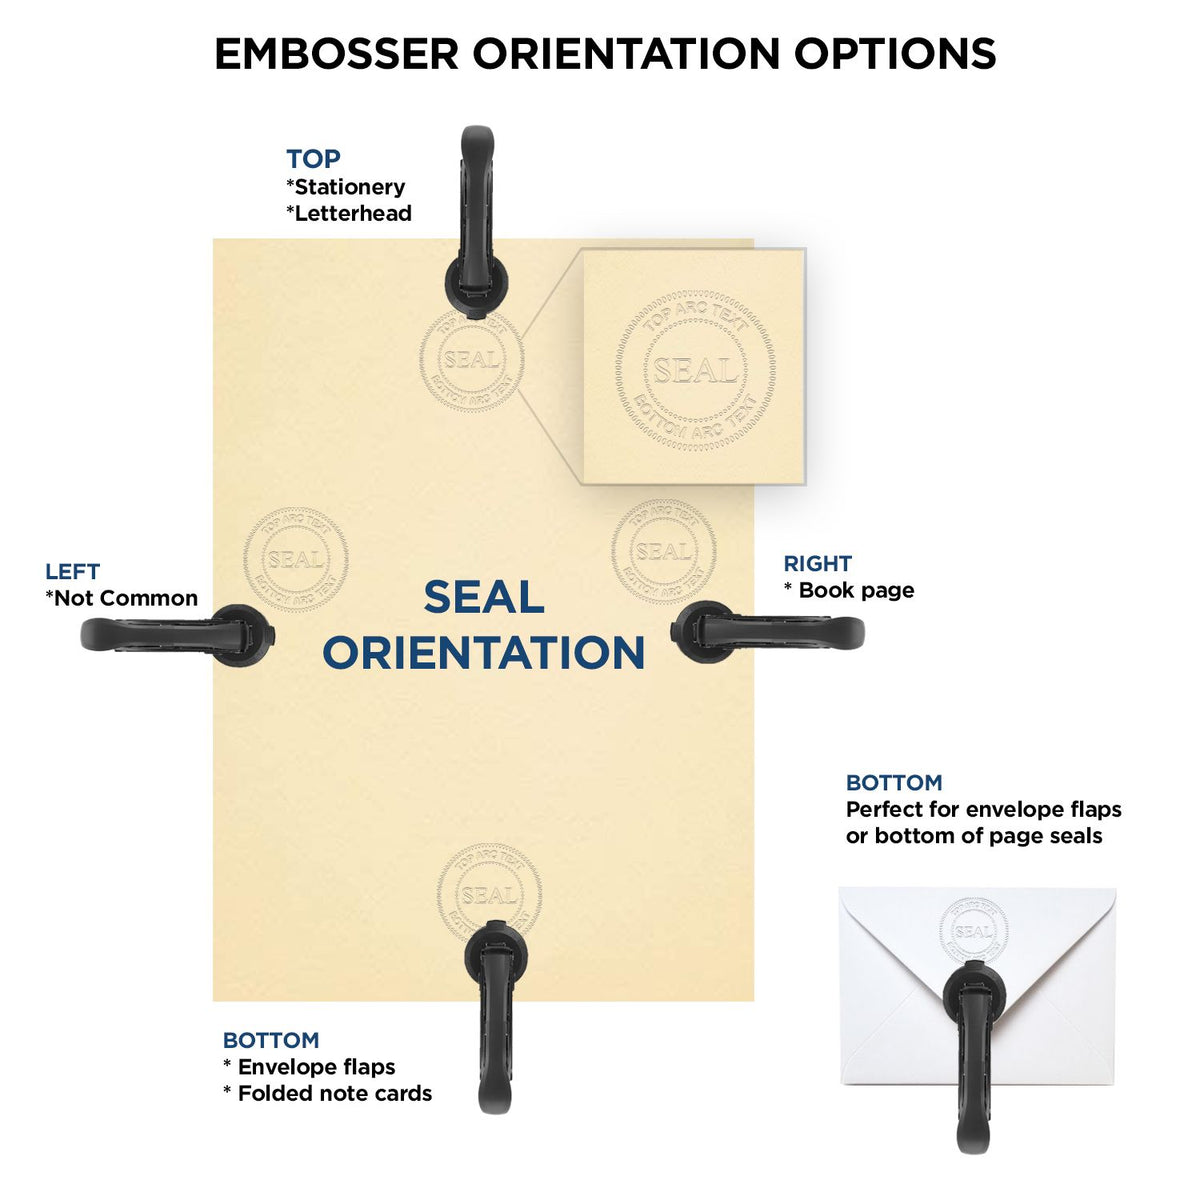 An infographic for the Long Reach Georgia PE Seal showing embosser orientation, this is showing examples of a top, bottom, right and left insert.